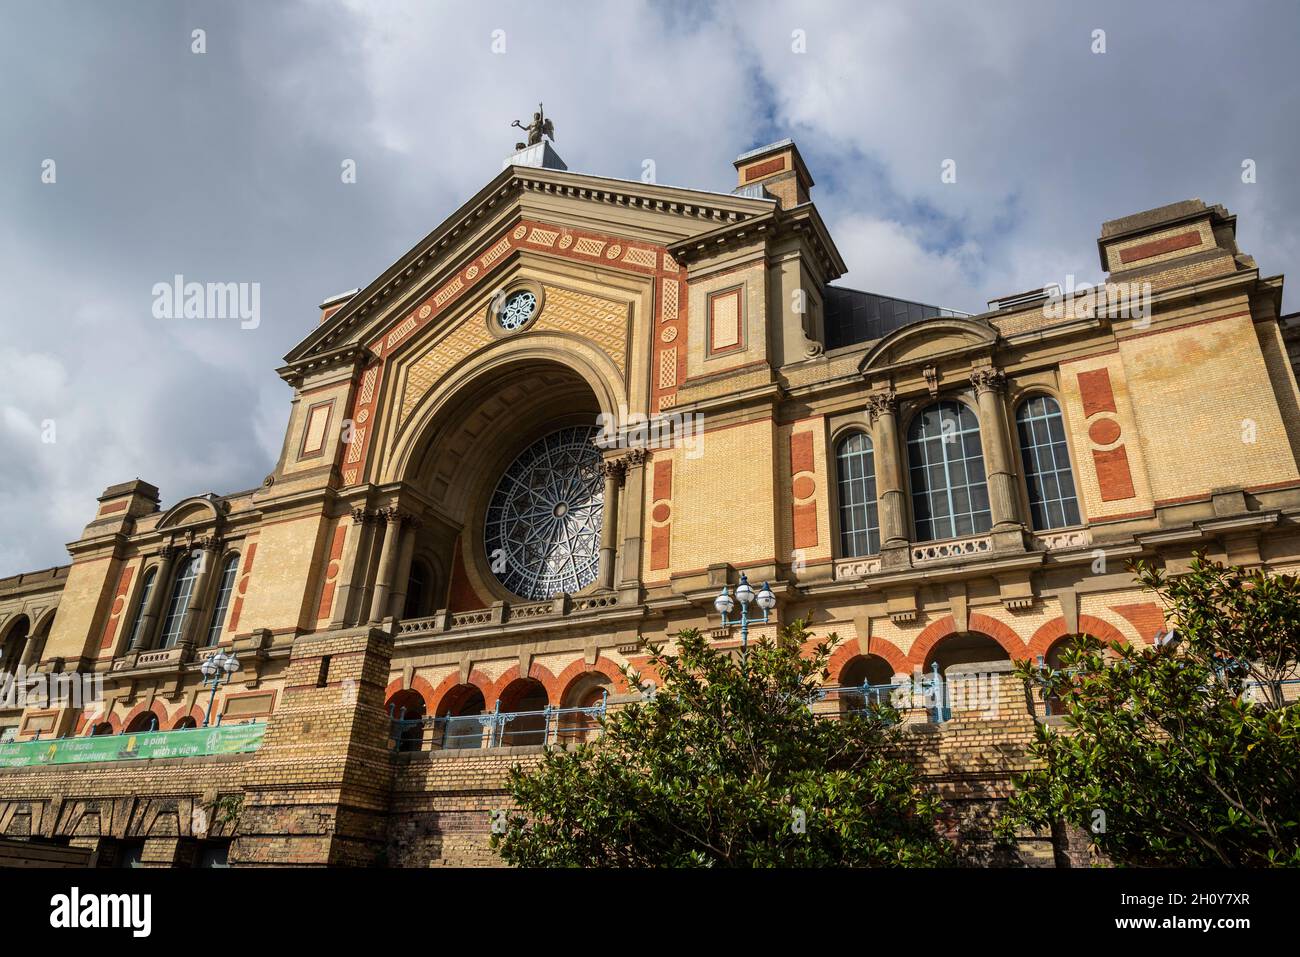 South facade with rose window of the Alexandra Palace, an entertainment and sports venue known as The People's Palace" and Ally Pally, London, UK Stock Photo